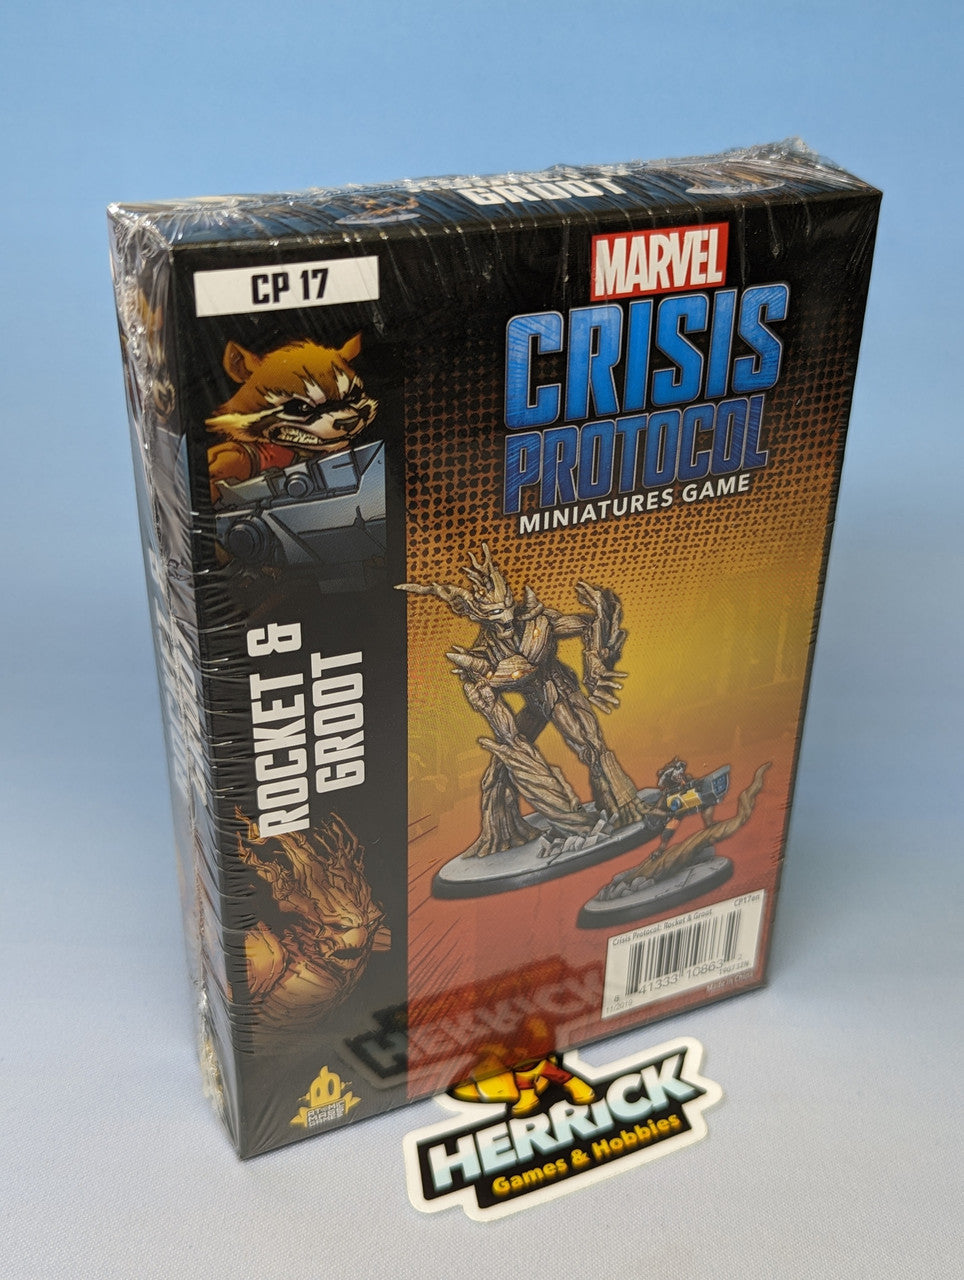 Marvel Crisis Protocol: Rocket and Groot